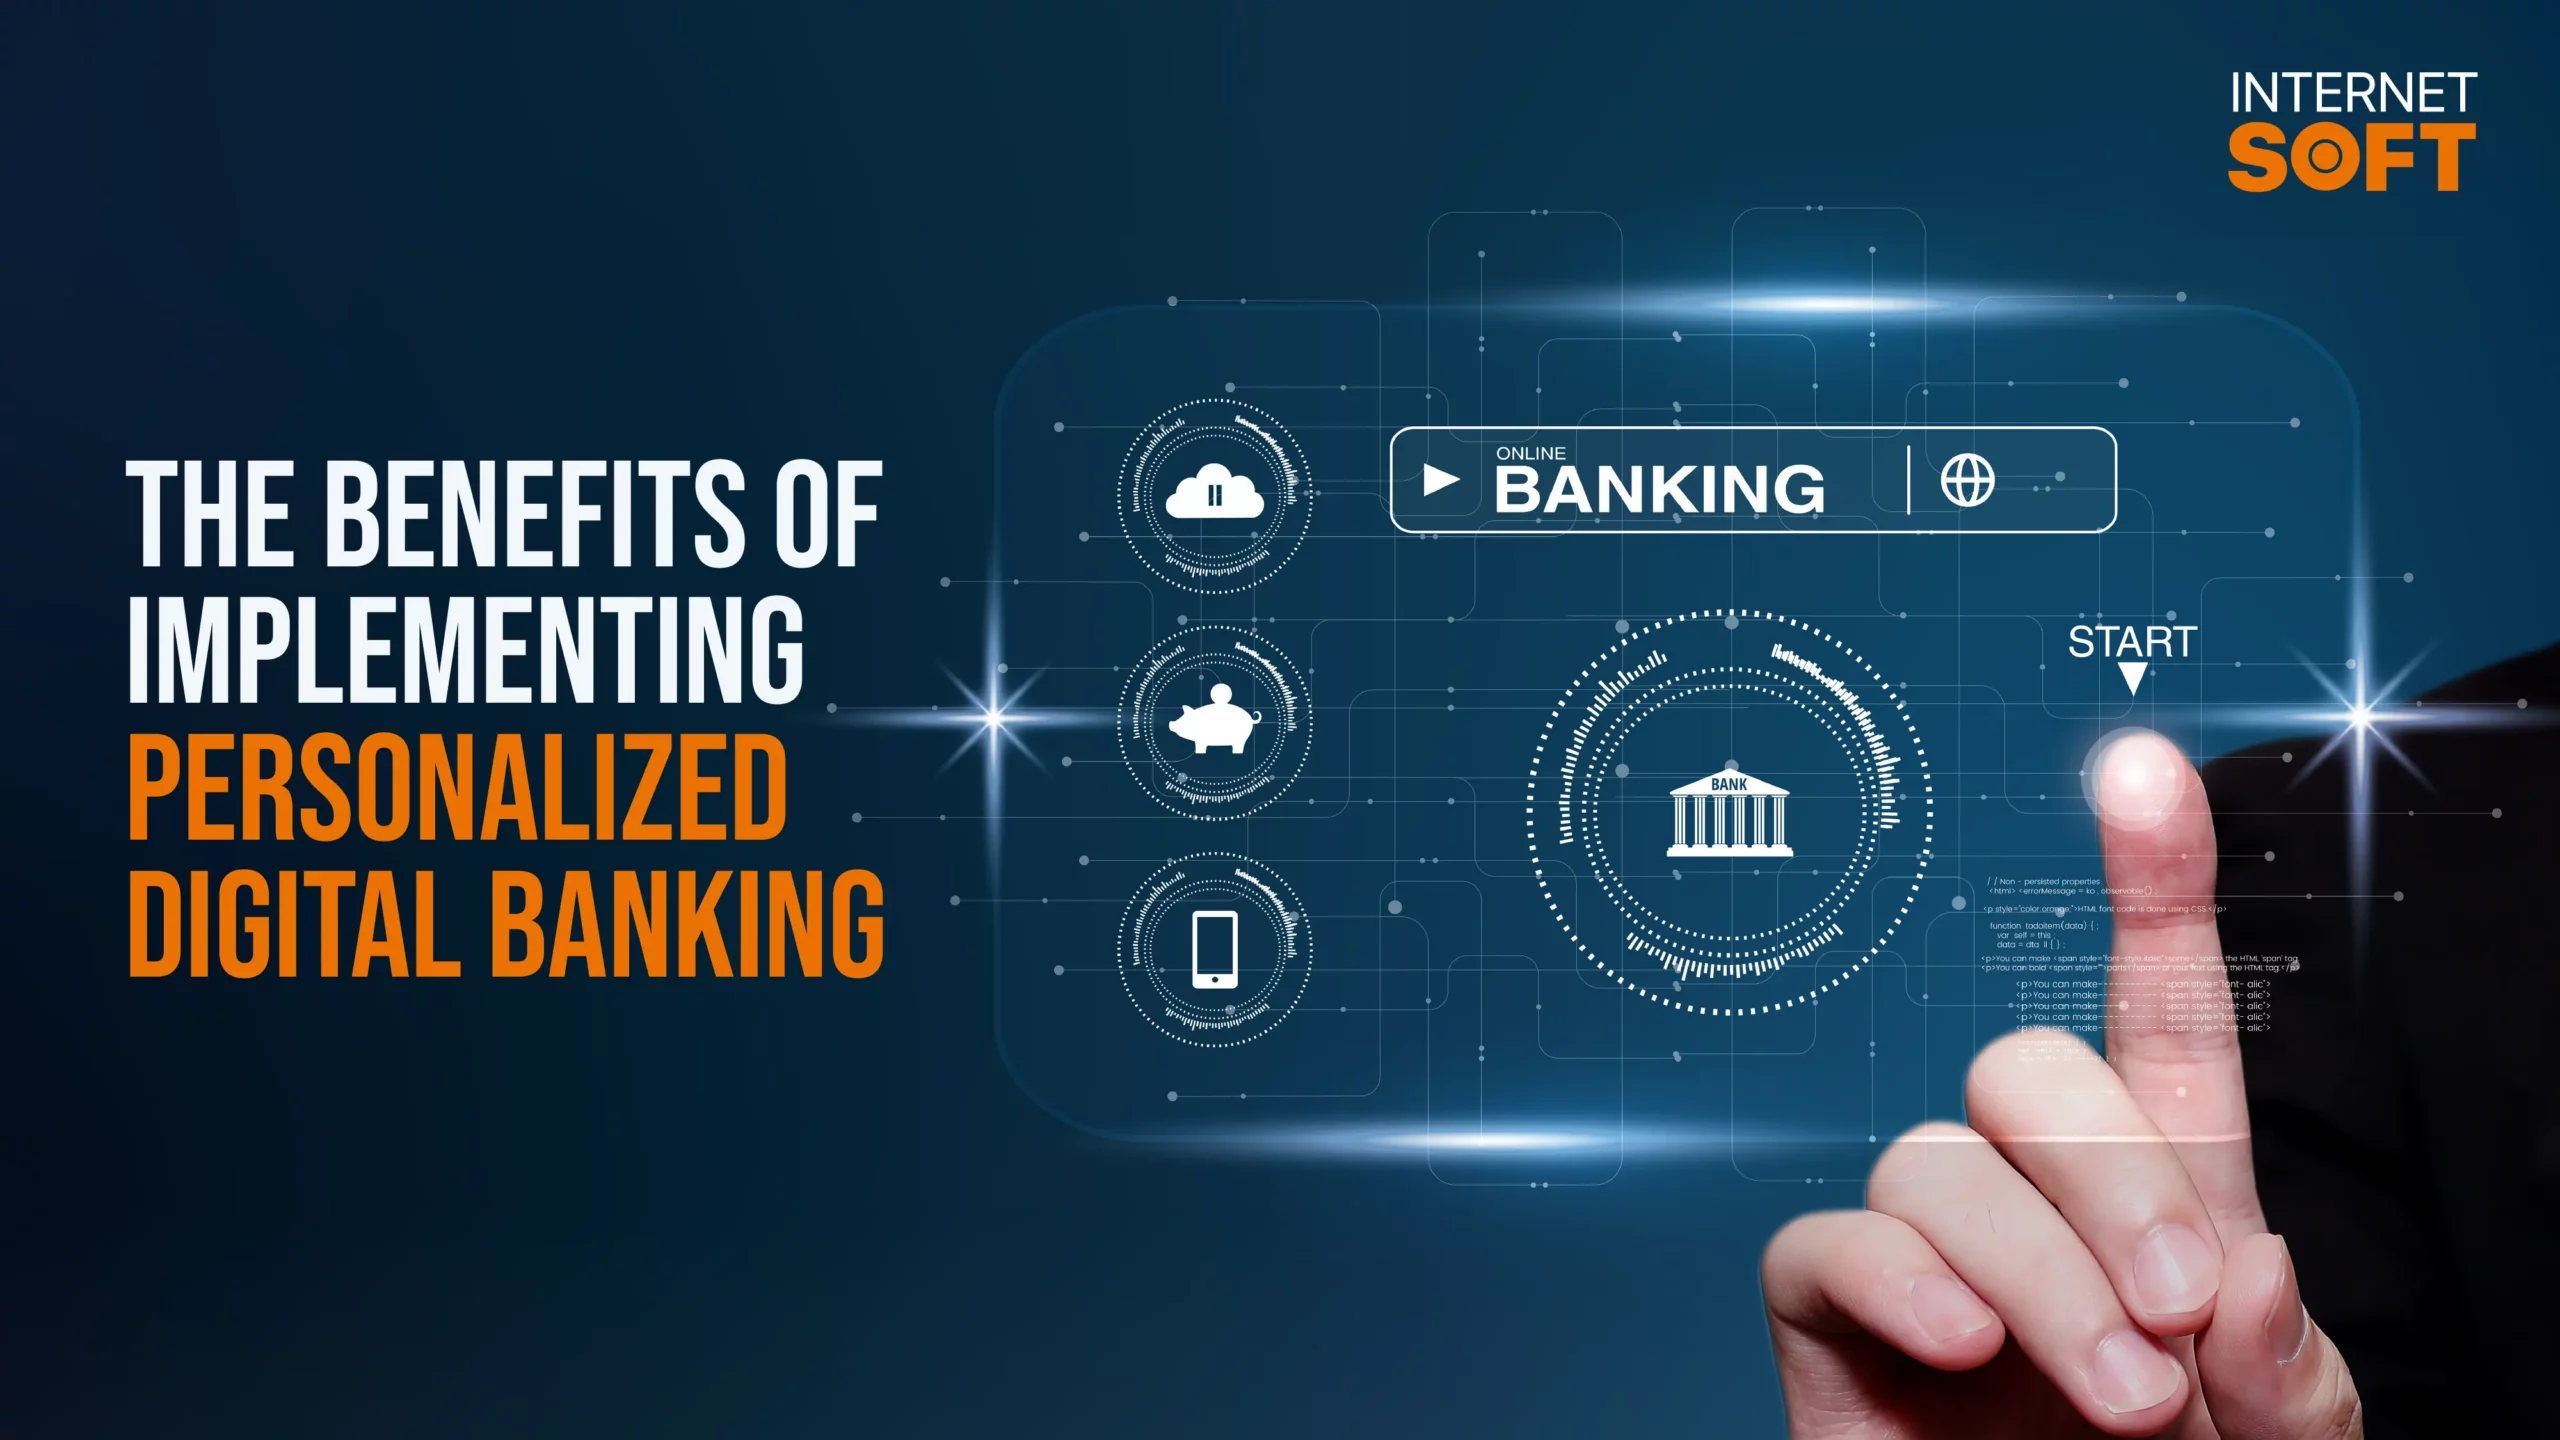 The Benefits of Implementing Personalized Digital Banking